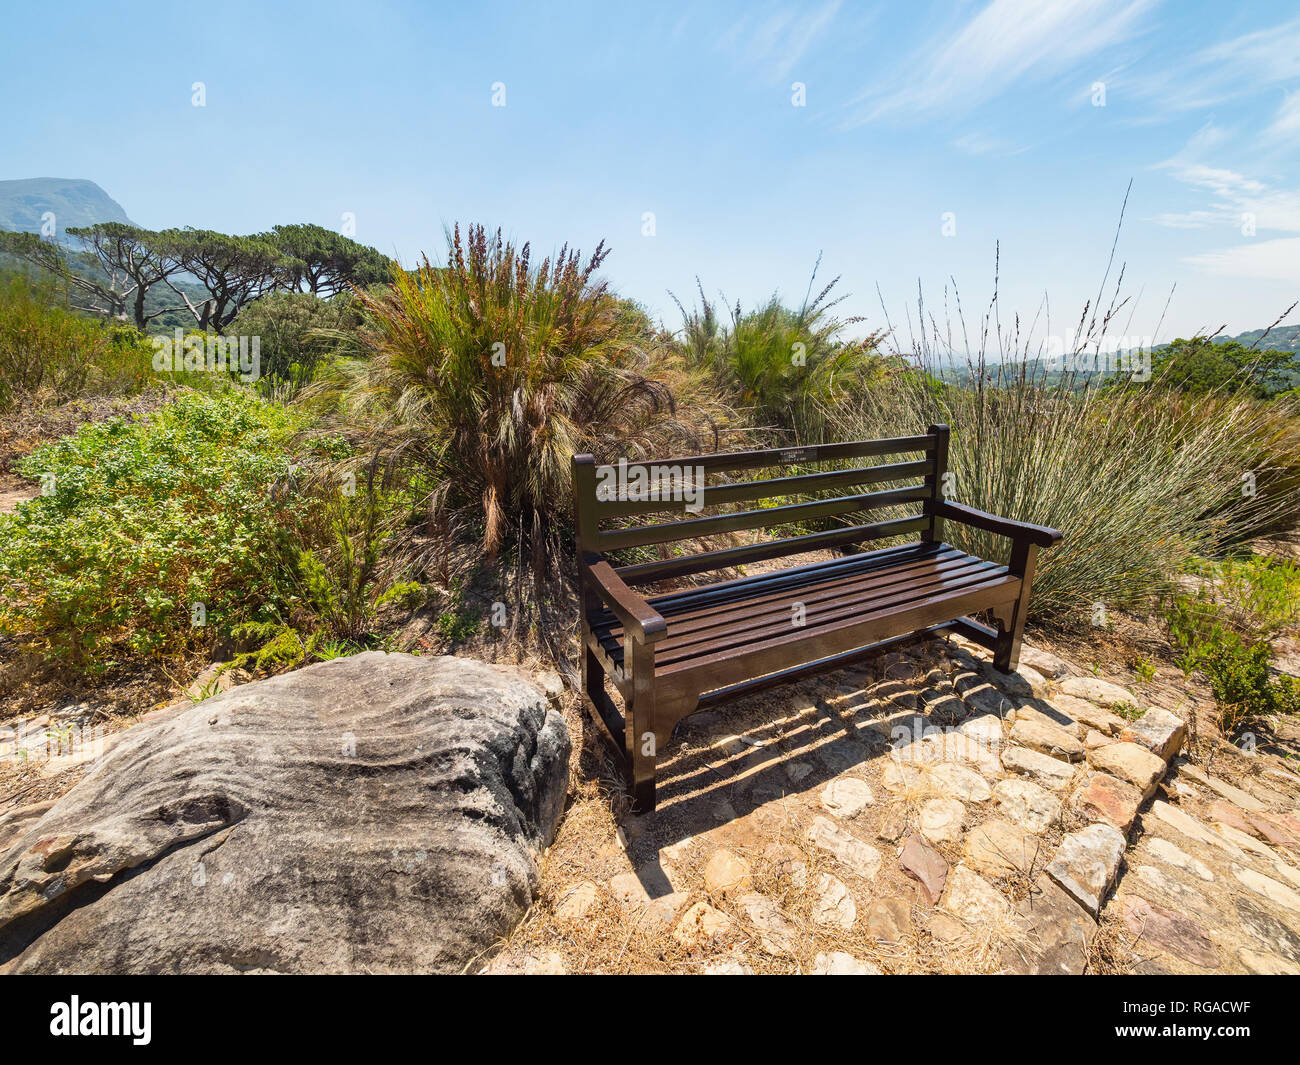 Rustic bench against the backdrop of Table mountain,. Kirstenbosch Botanical Garden, suburb of Cape Town, Western Cape, South Africa. Stock Photo